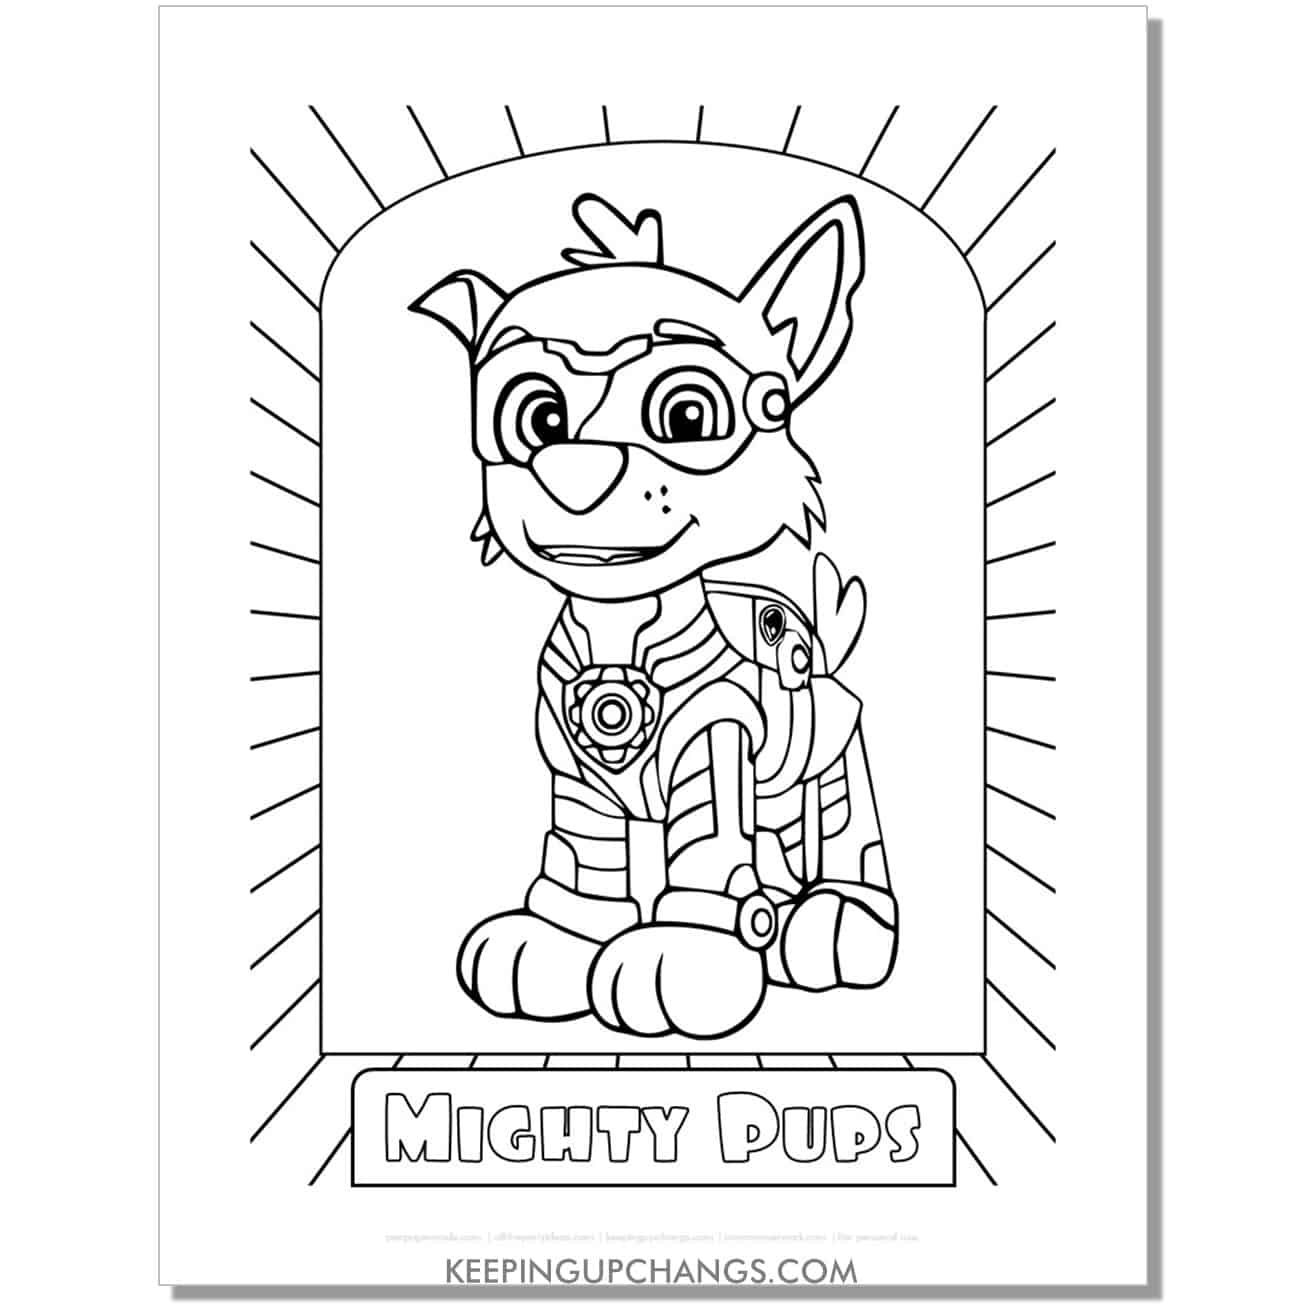 free rocky mighty pup paw patrol coloring page, sheet.